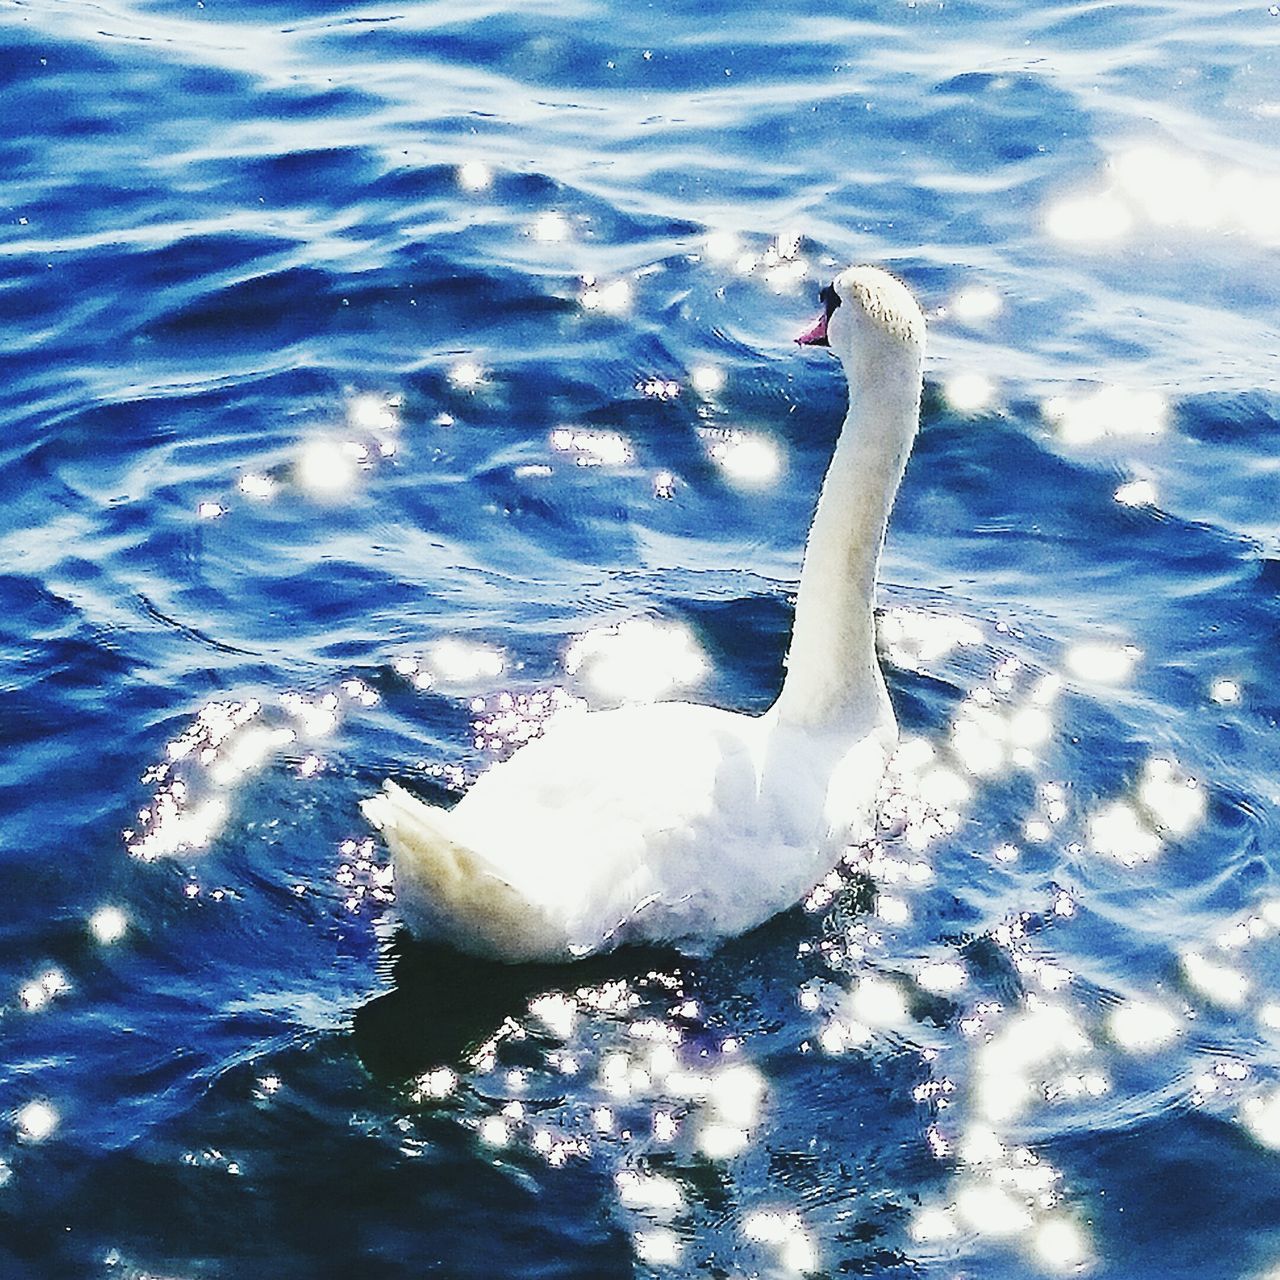 animal themes, water, animals in the wild, bird, wildlife, swimming, one animal, swan, waterfront, lake, nature, rippled, white color, beauty in nature, high angle view, outdoors, no people, day, zoology